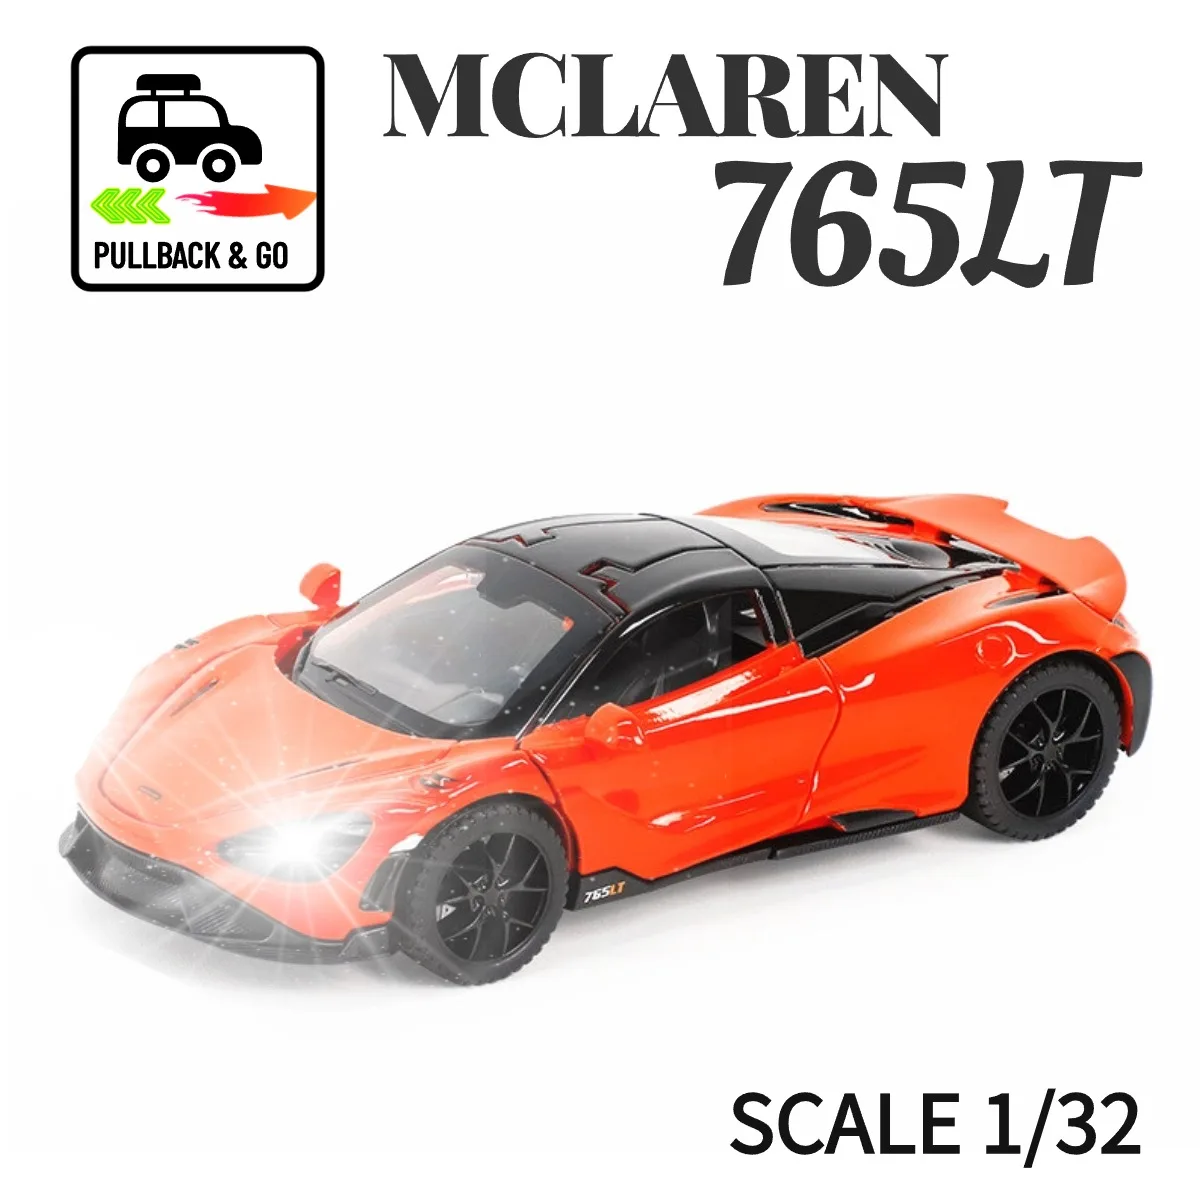 

1:32 Mclaren 765LT Pullback Car Toy with Lights Engine Sound, Metal Diecast Car Model Scale Replica Gift Kid Boy Toy